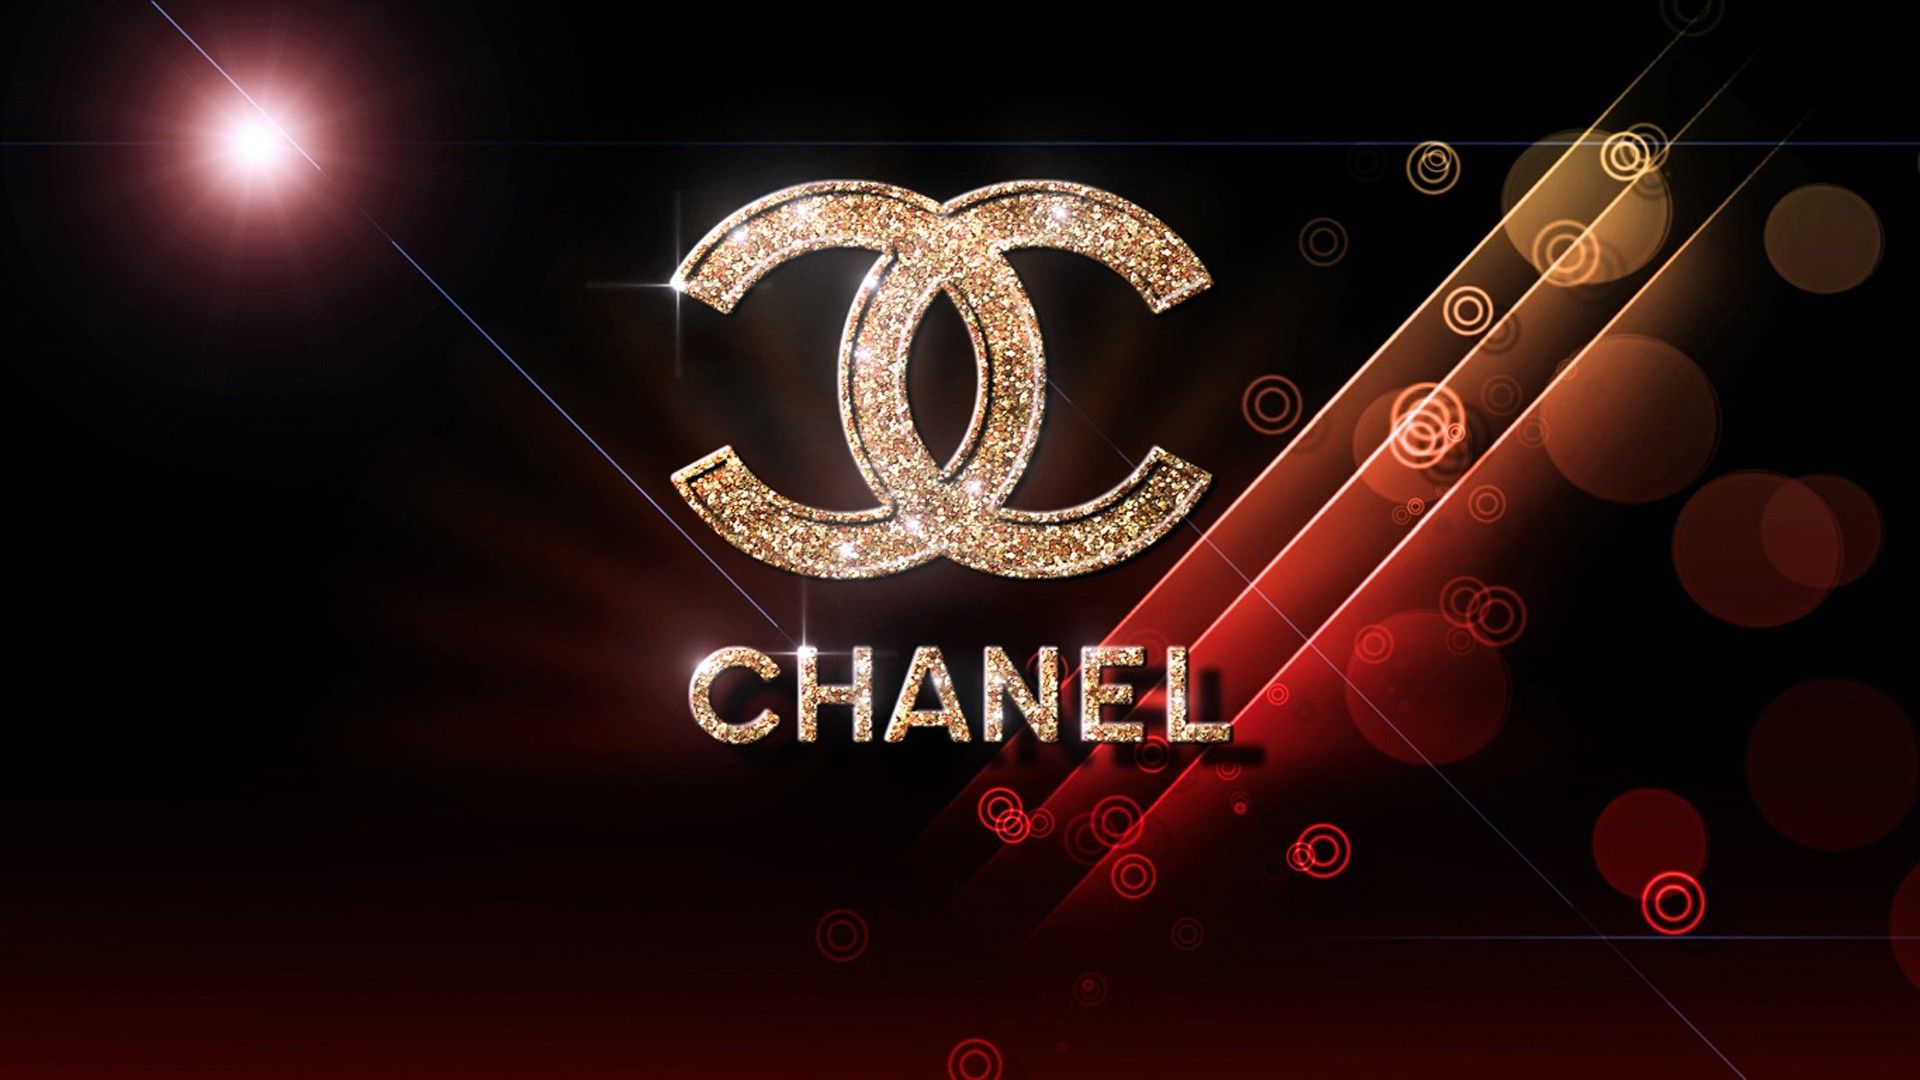 The chanel logo on a black background - Chanel